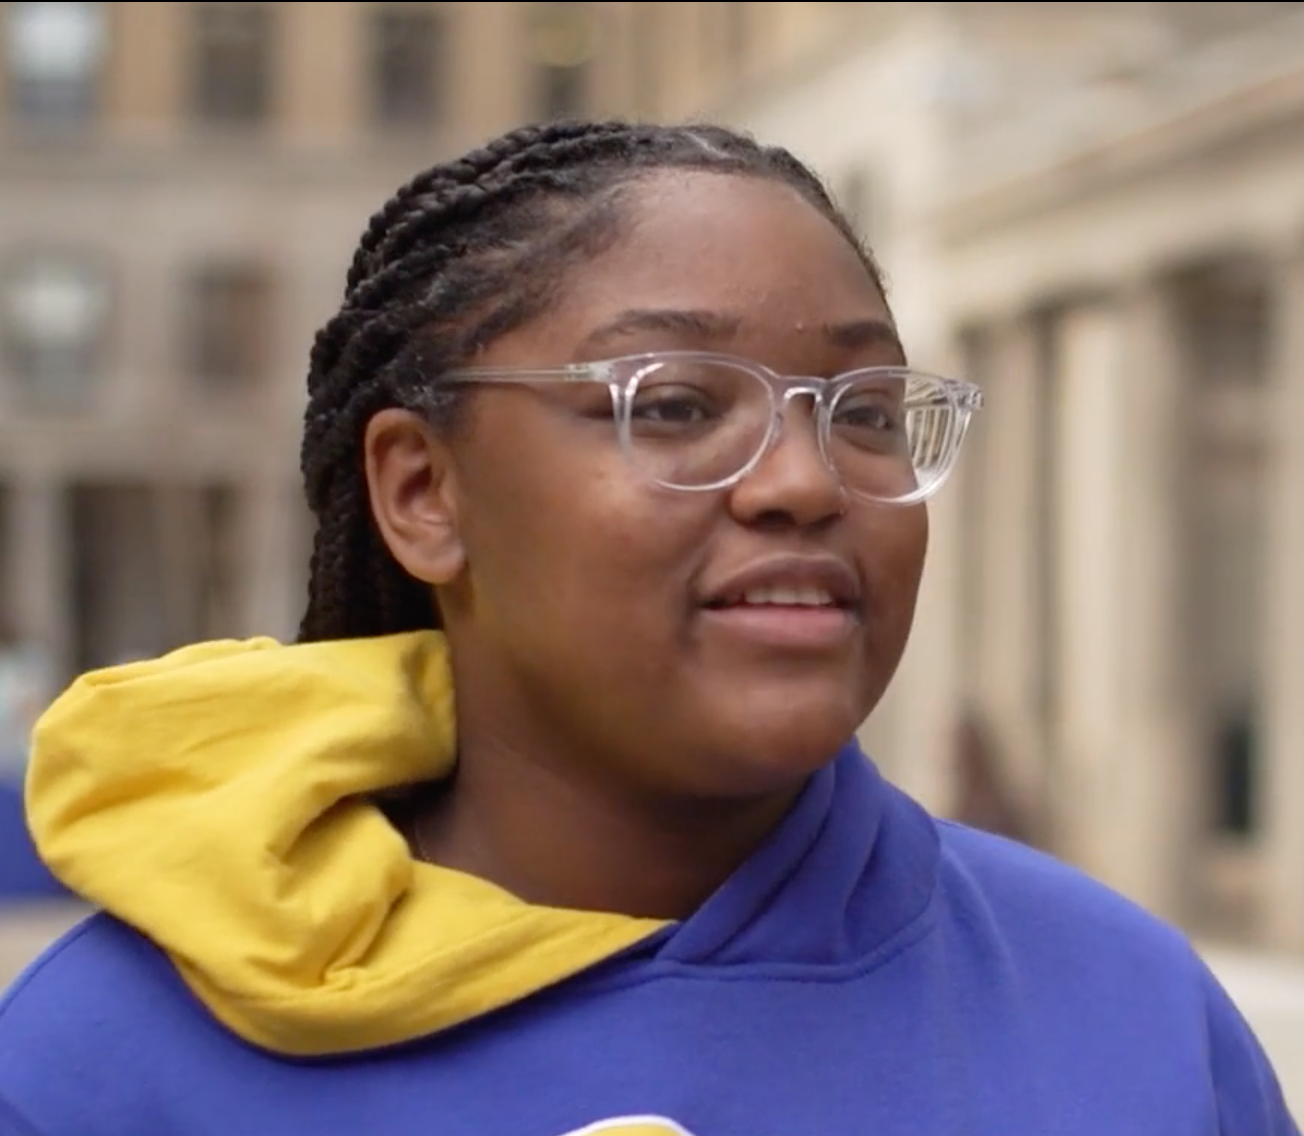 Young Black woman with clear-framed glasses, braids and blue and gold hoodie stands in front of buildings